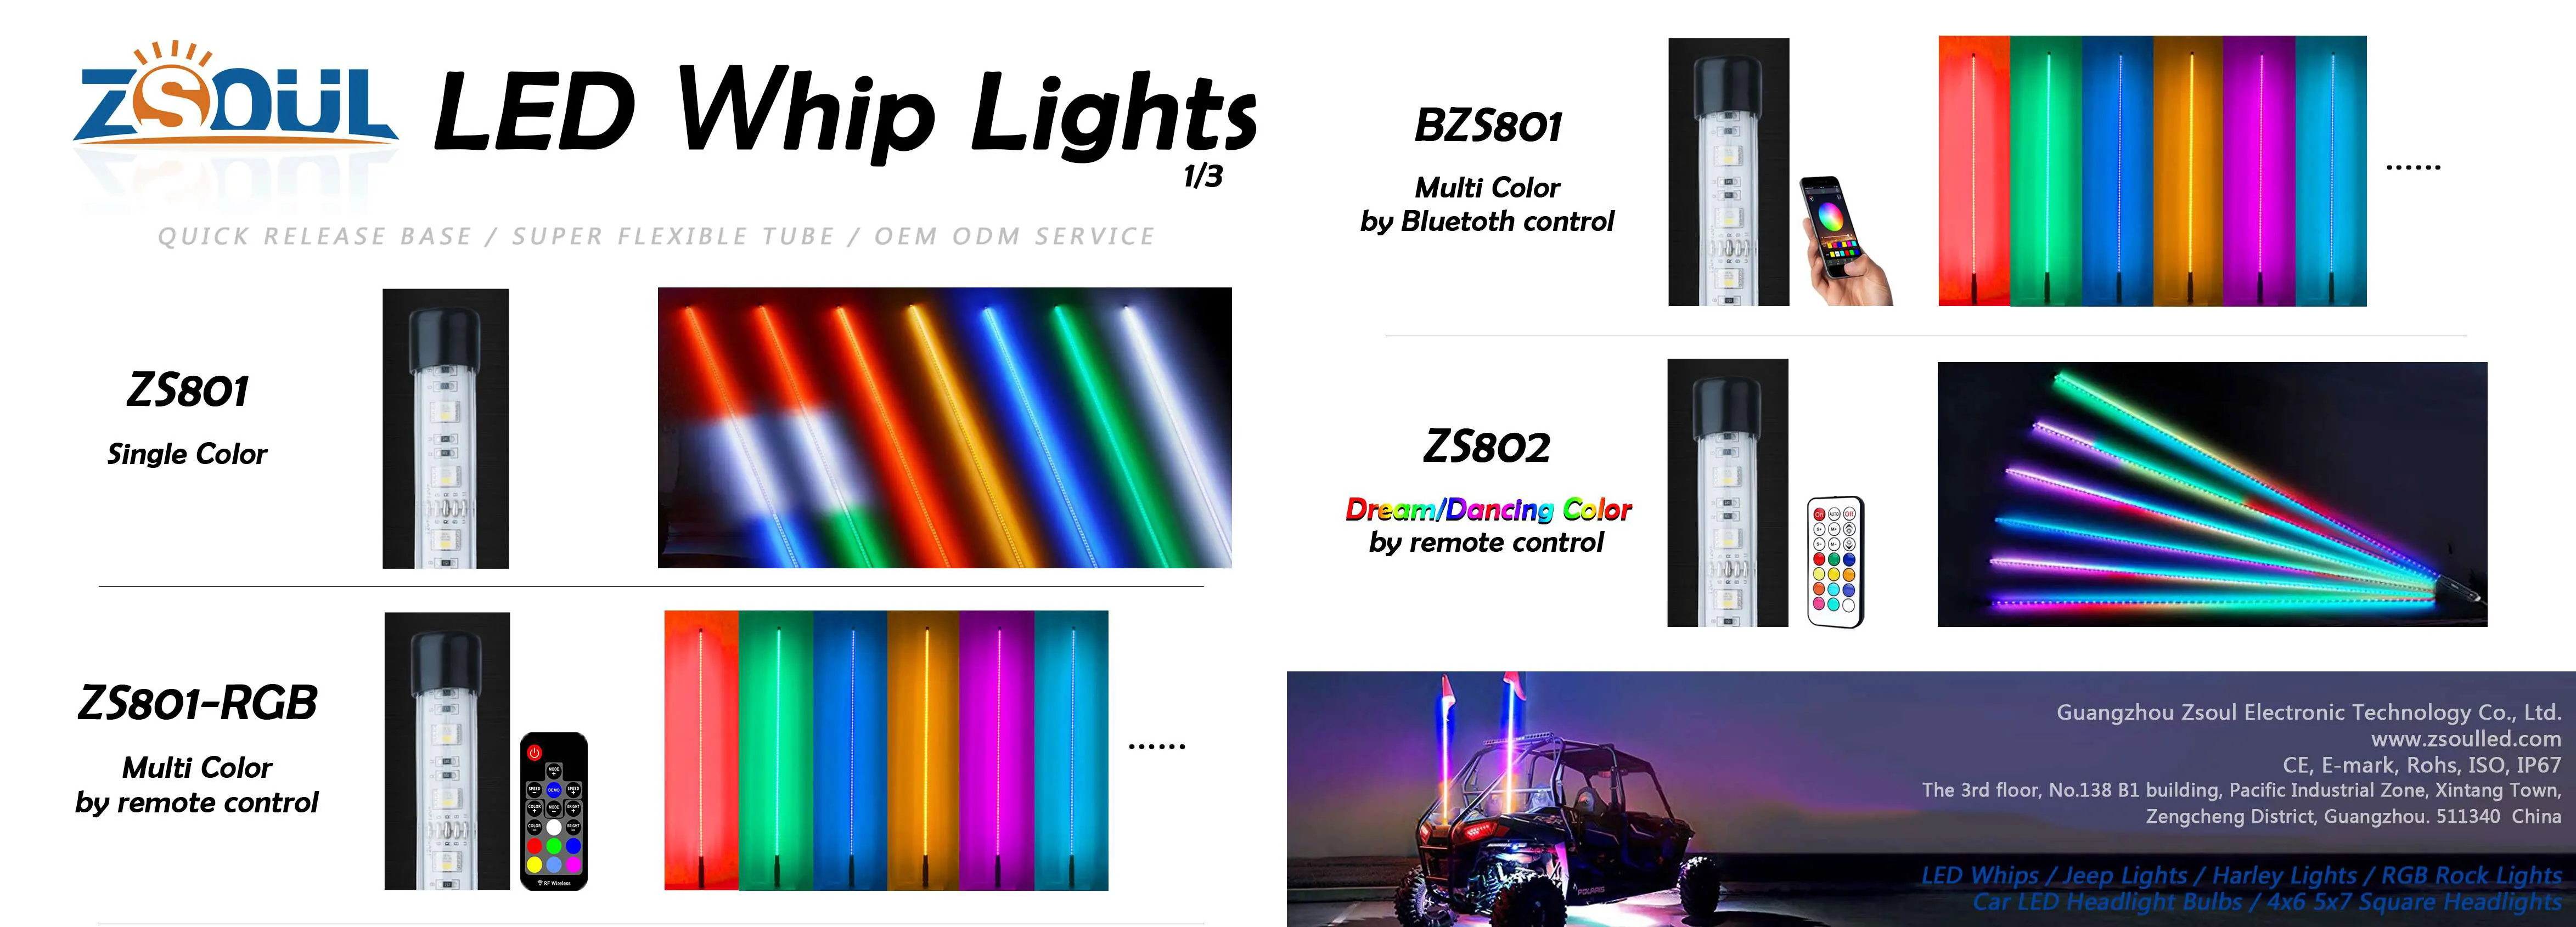 RGB-LED-whip-picture.jpg